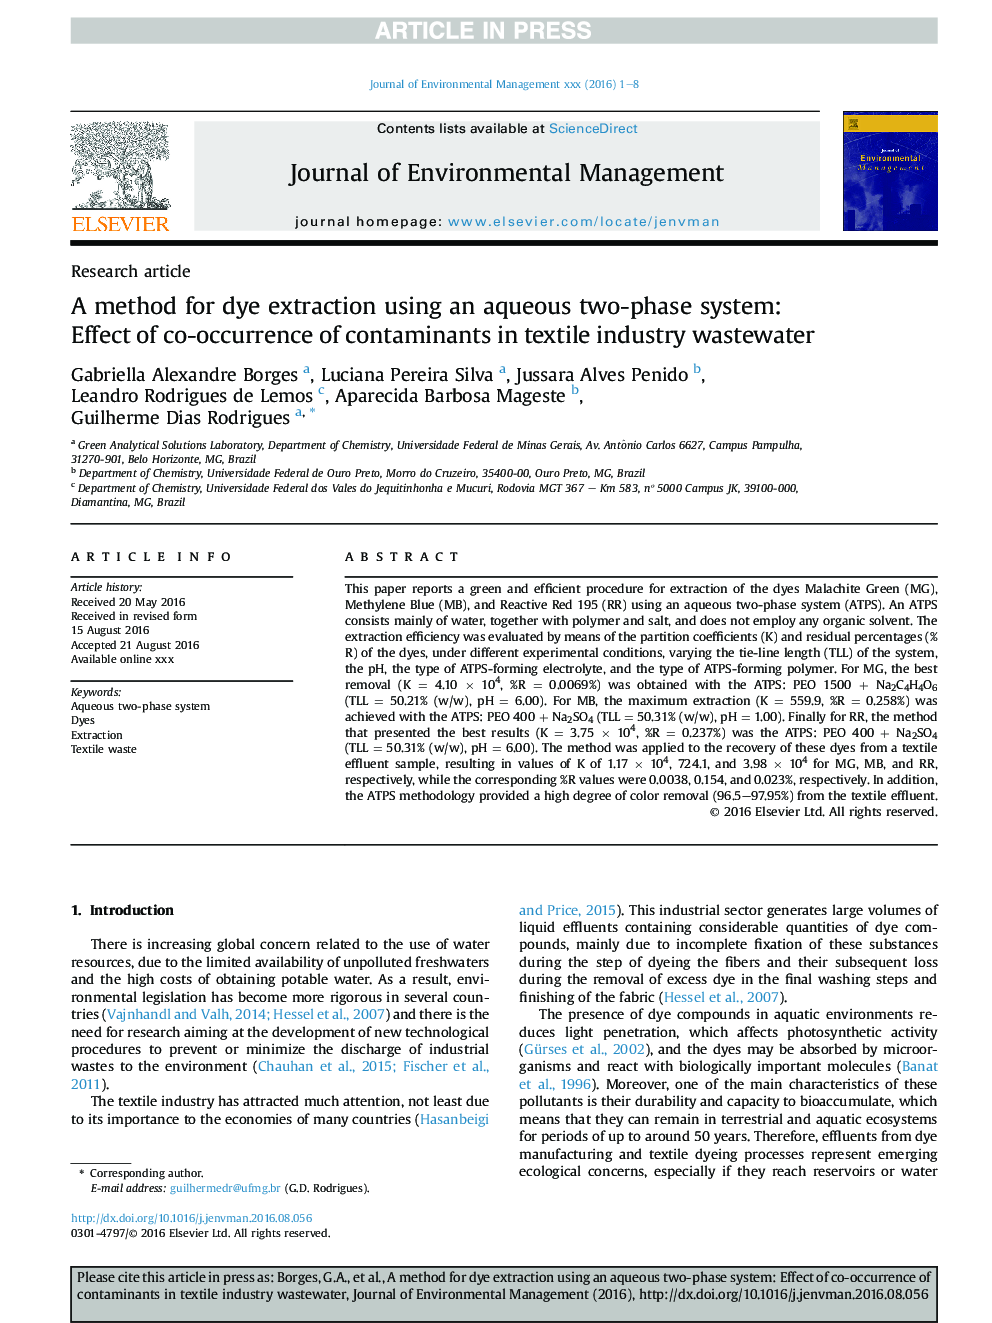 A method for dye extraction using an aqueous two-phase system: Effect of co-occurrence of contaminants in textile industry wastewater